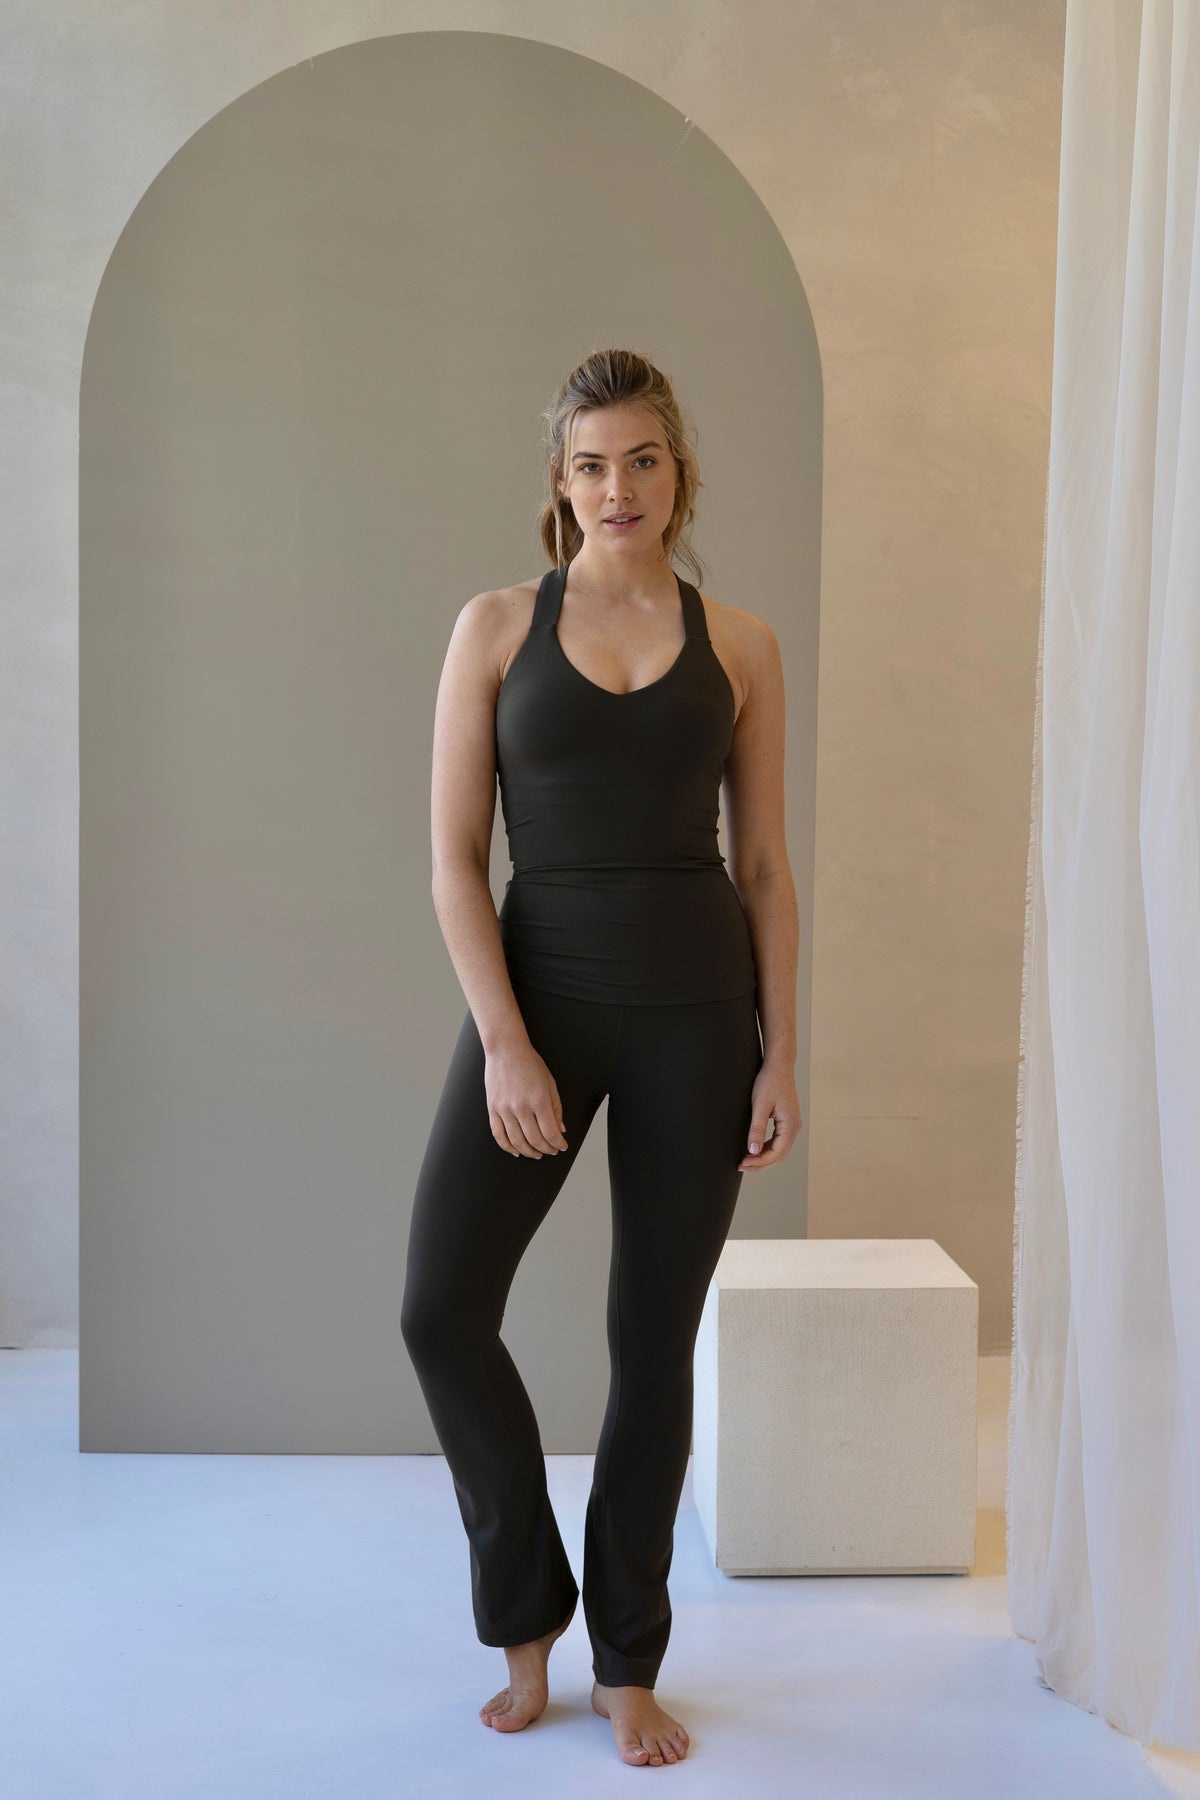 yoga outfit Archives - Styleoholic